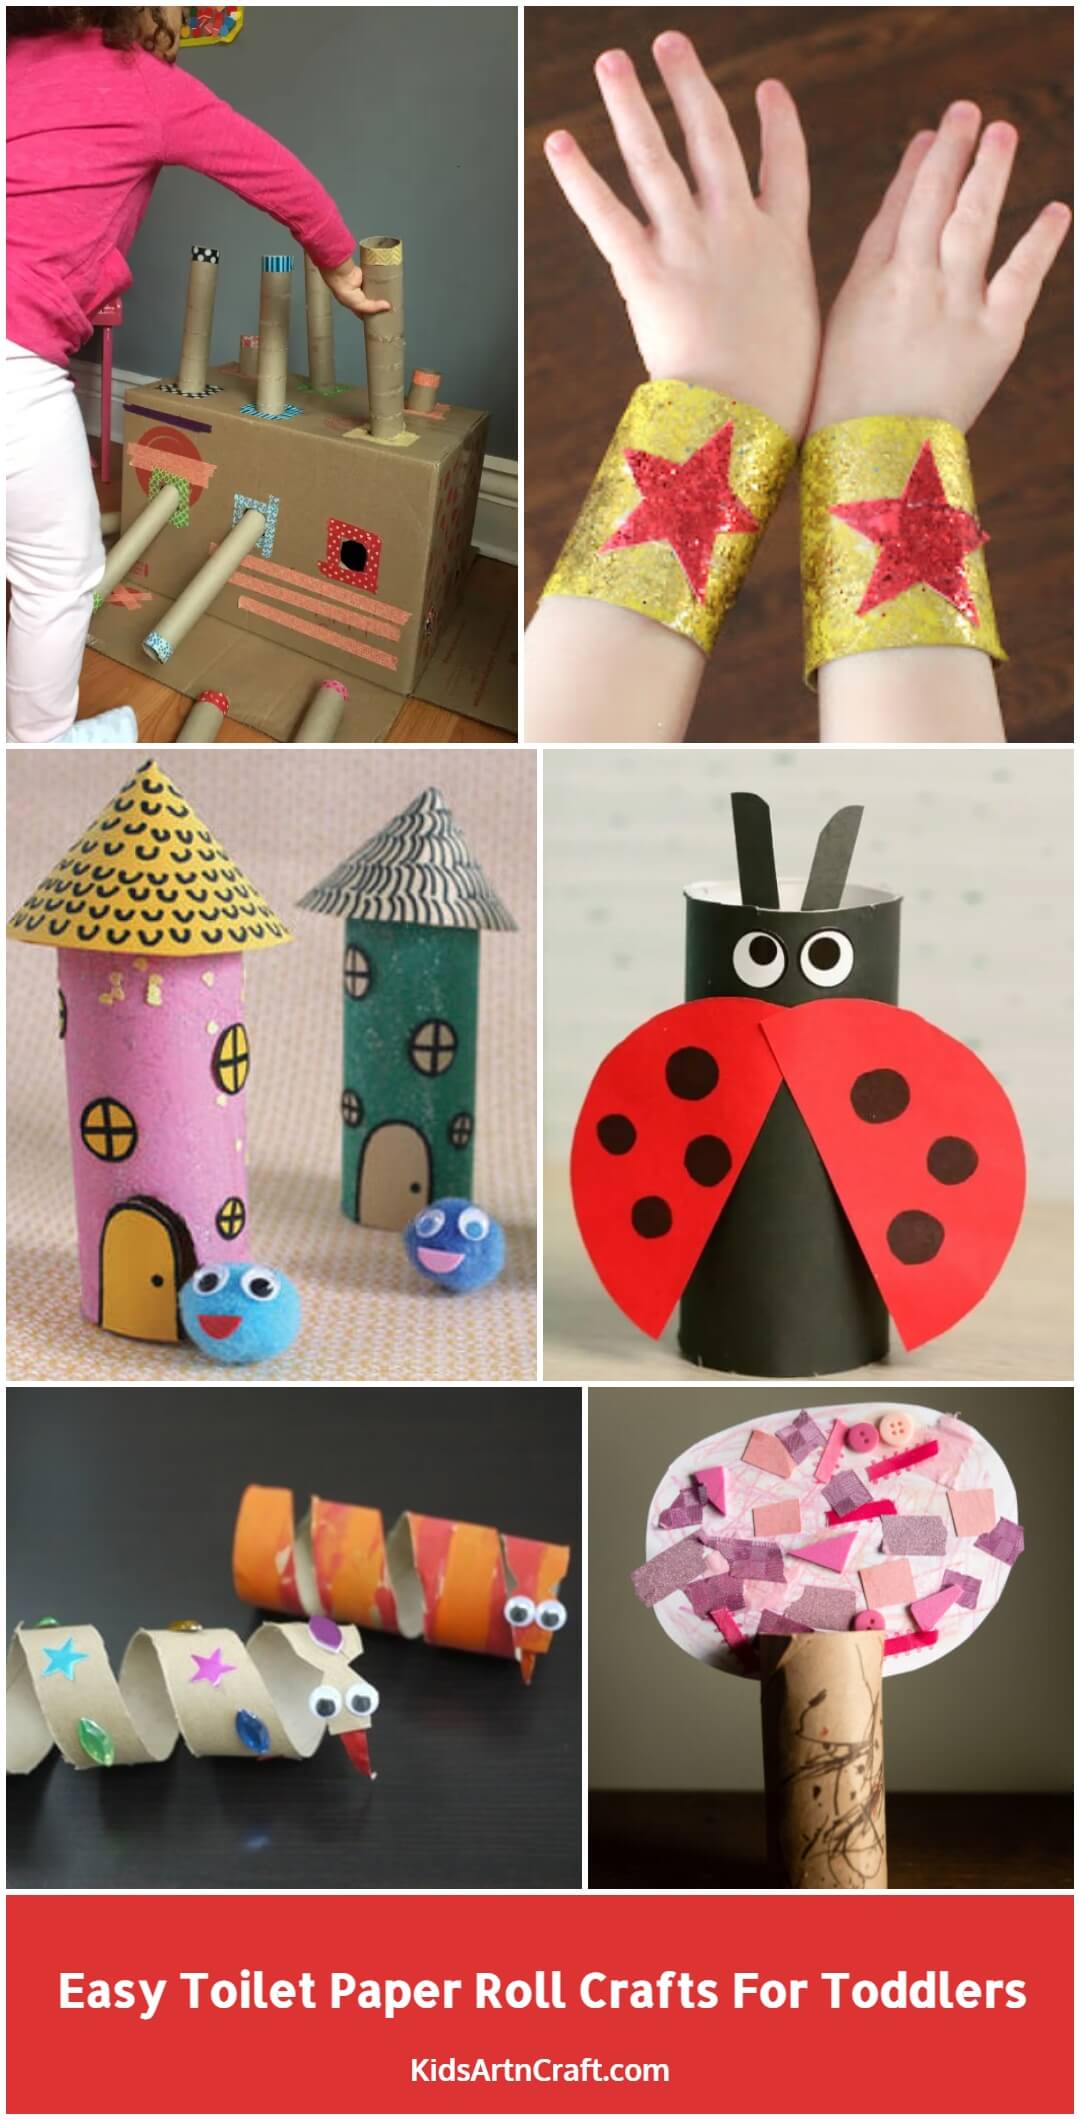 Easy Toilet Paper Roll Crafts For Toddlers